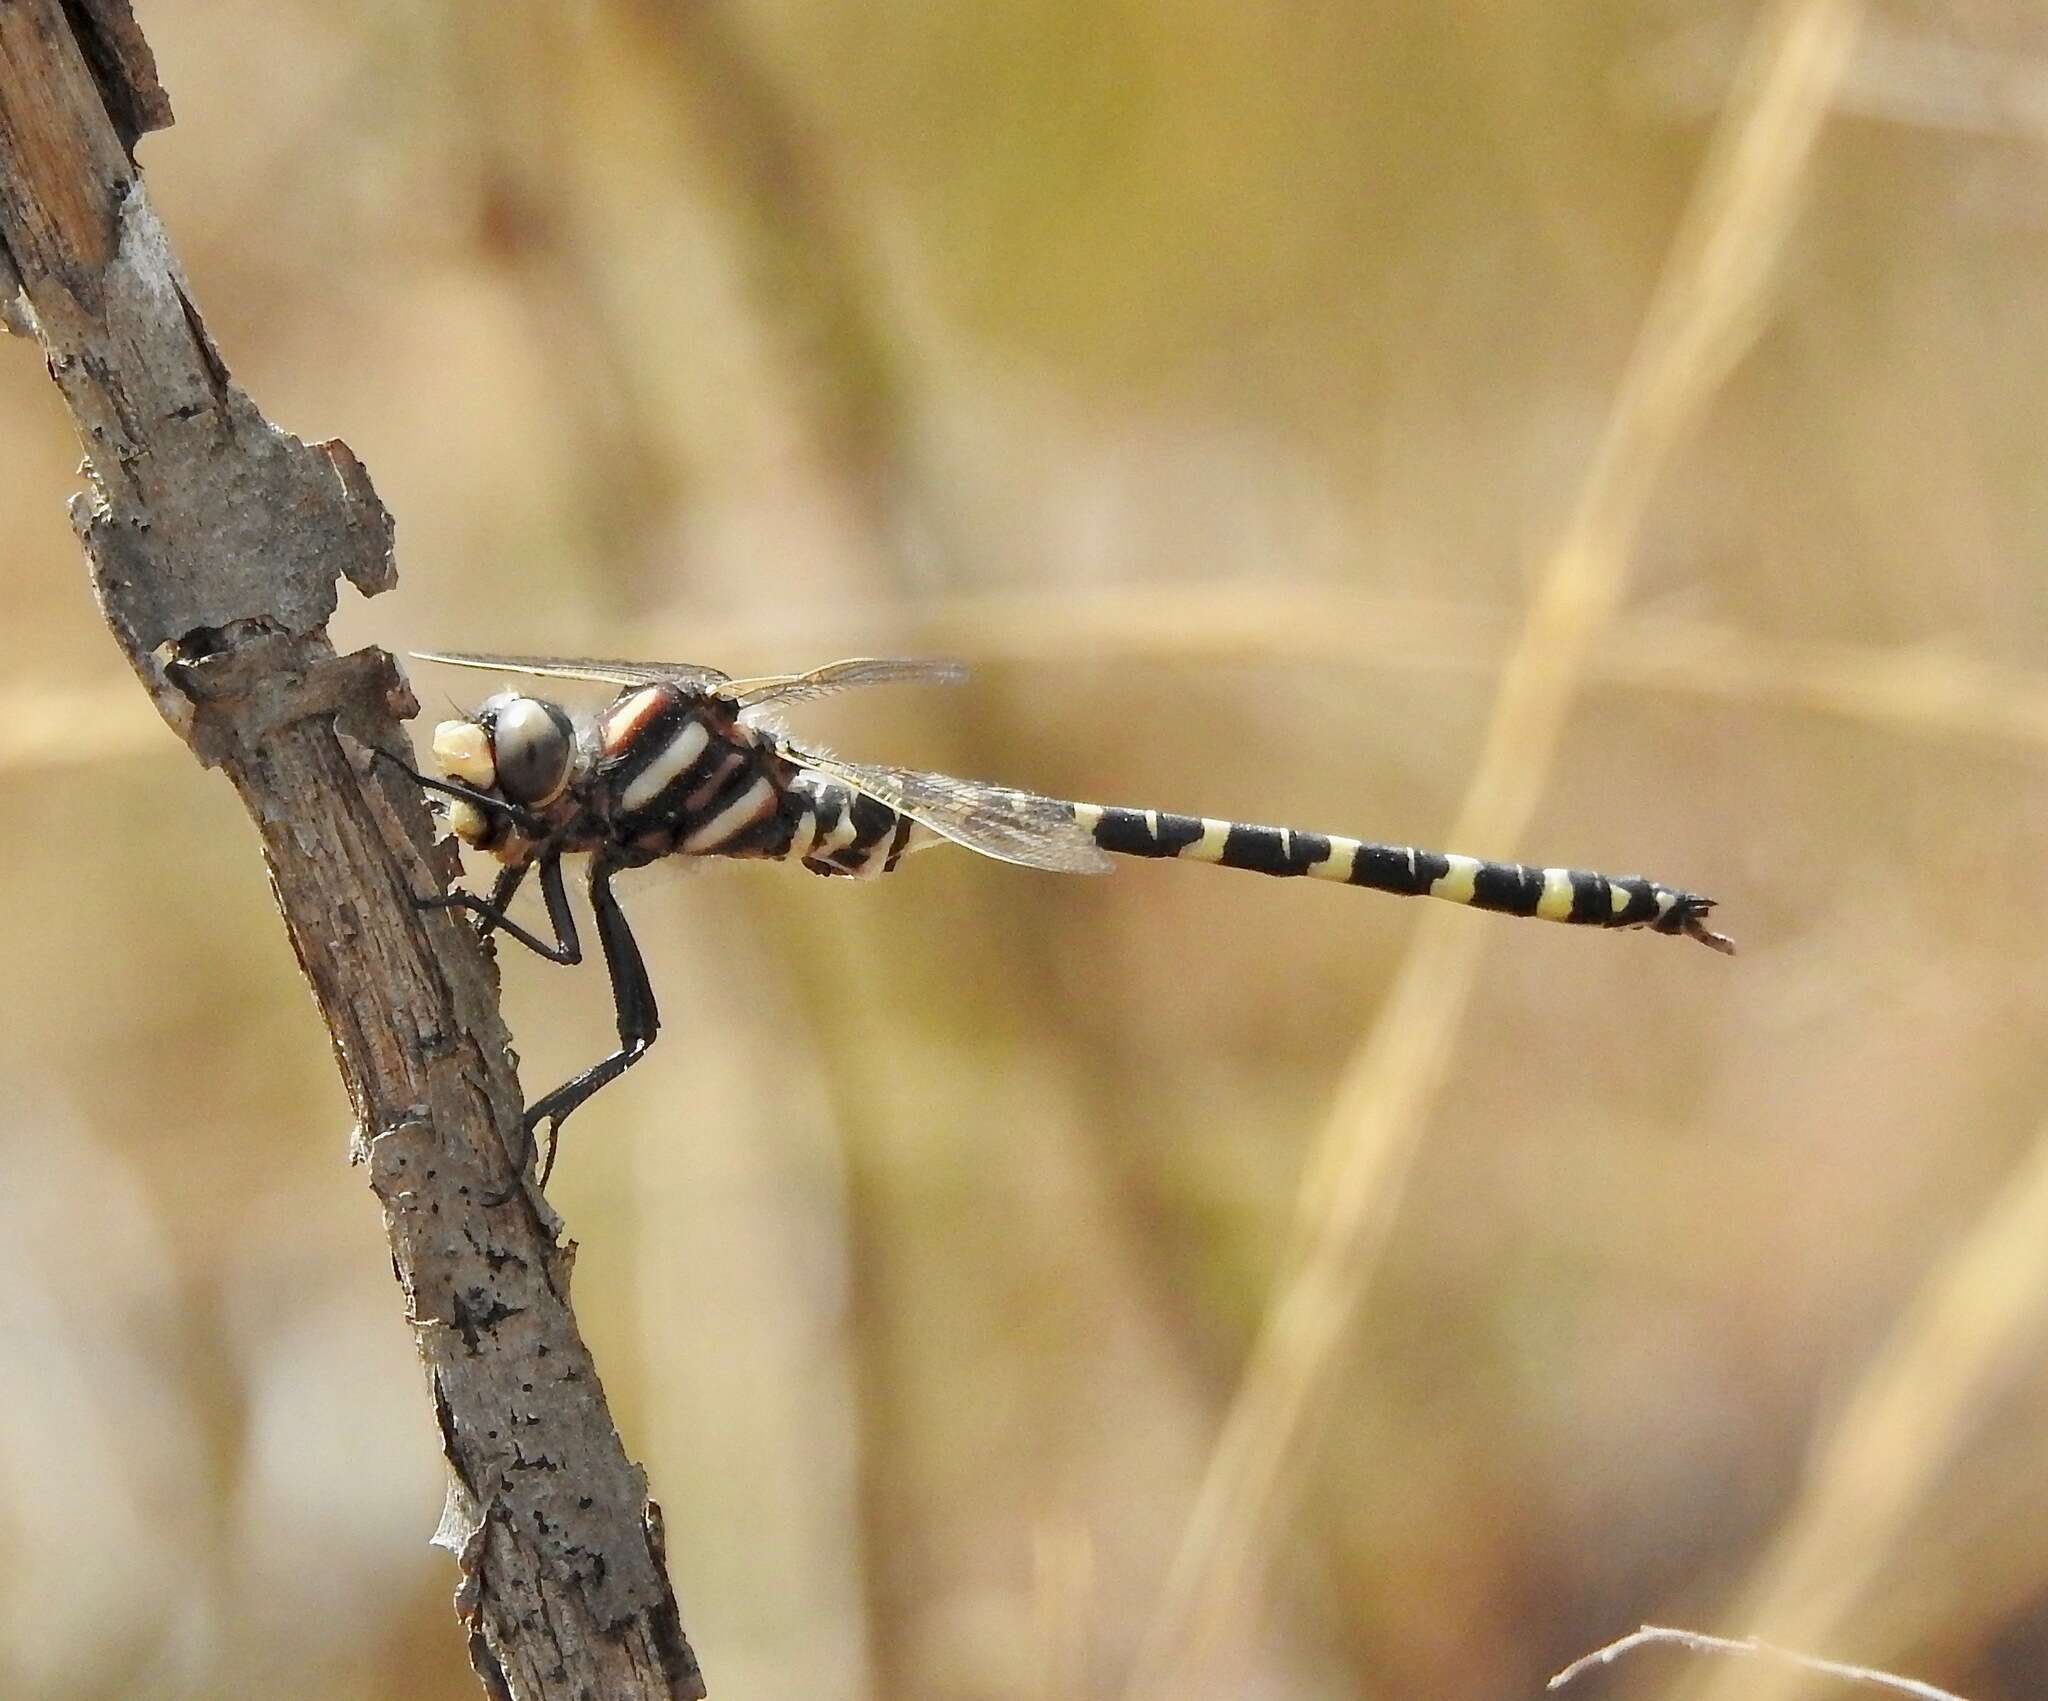 Image of Say's Spiketail